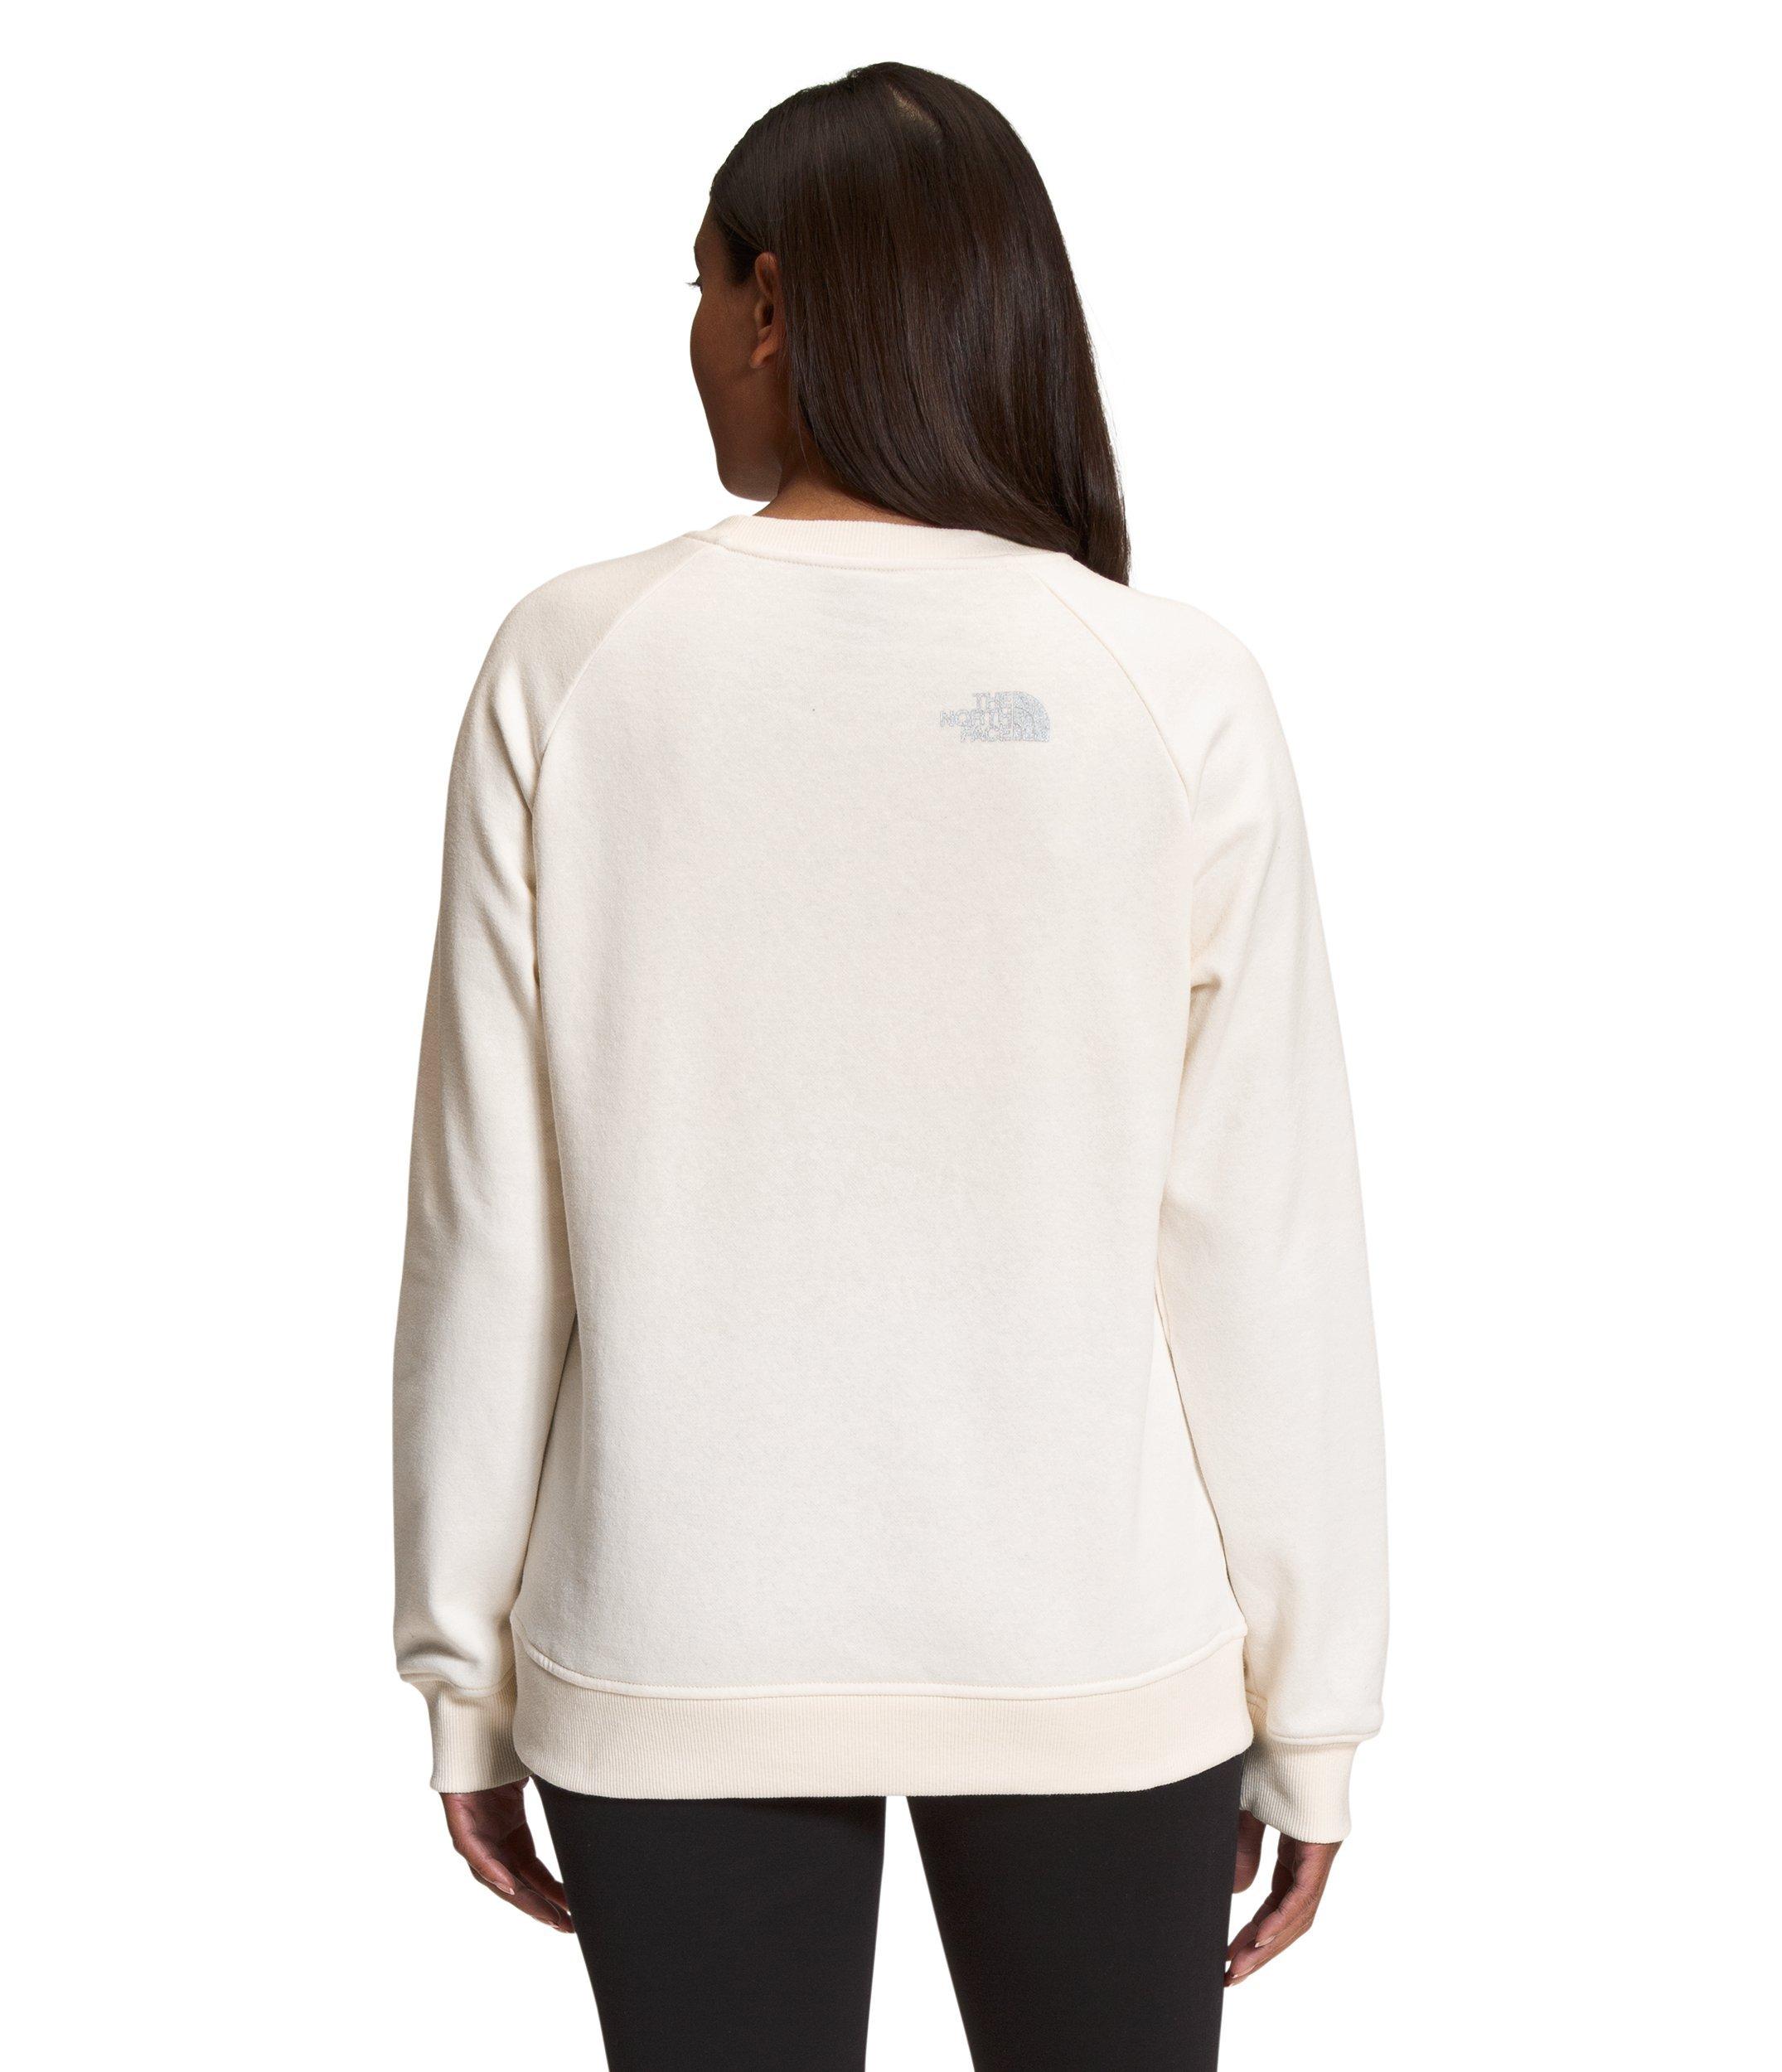 The North Face Women's Graphic Injection Crewneck Sweatshirt